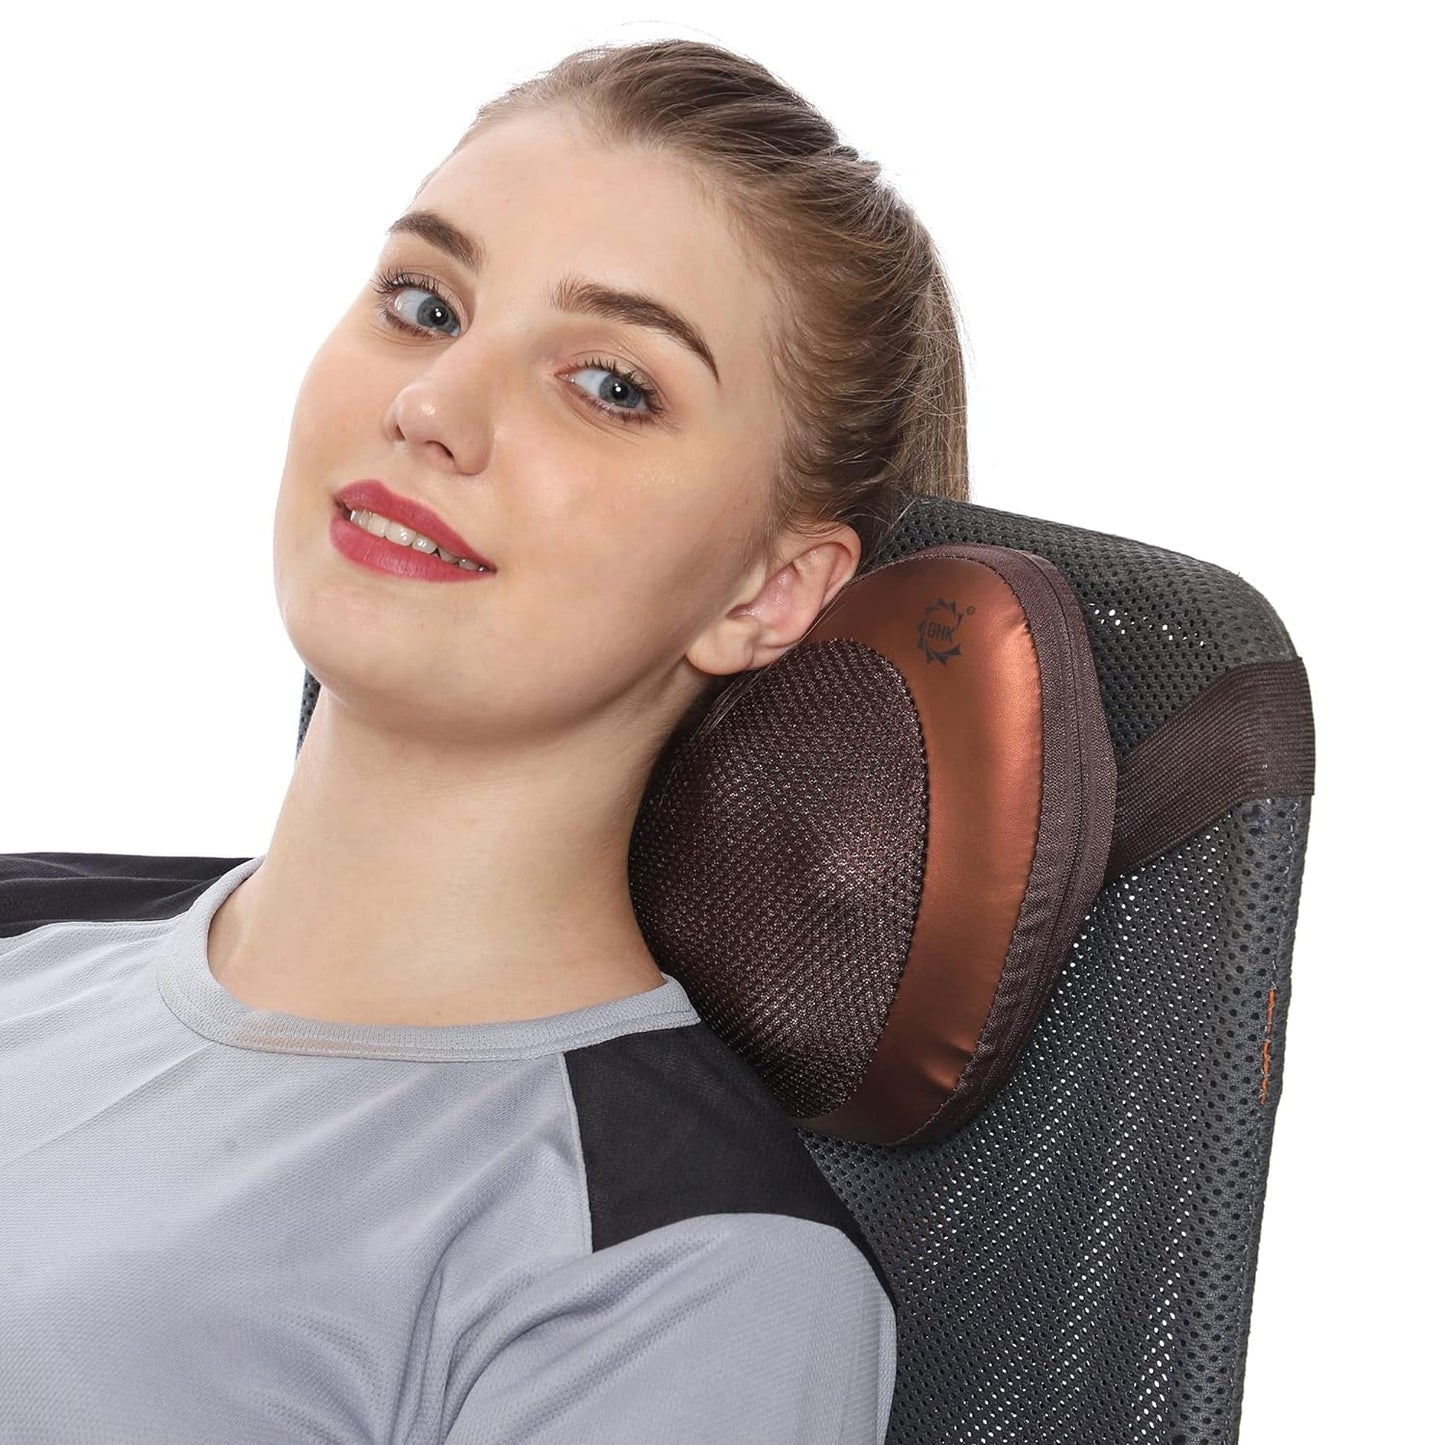 0102  Body Massage Pillow neck massager cushion seat stress pain relief relax massage Car or Electronic Massage Pillow Massager 8 Ball Neck Shoulder Massager Back